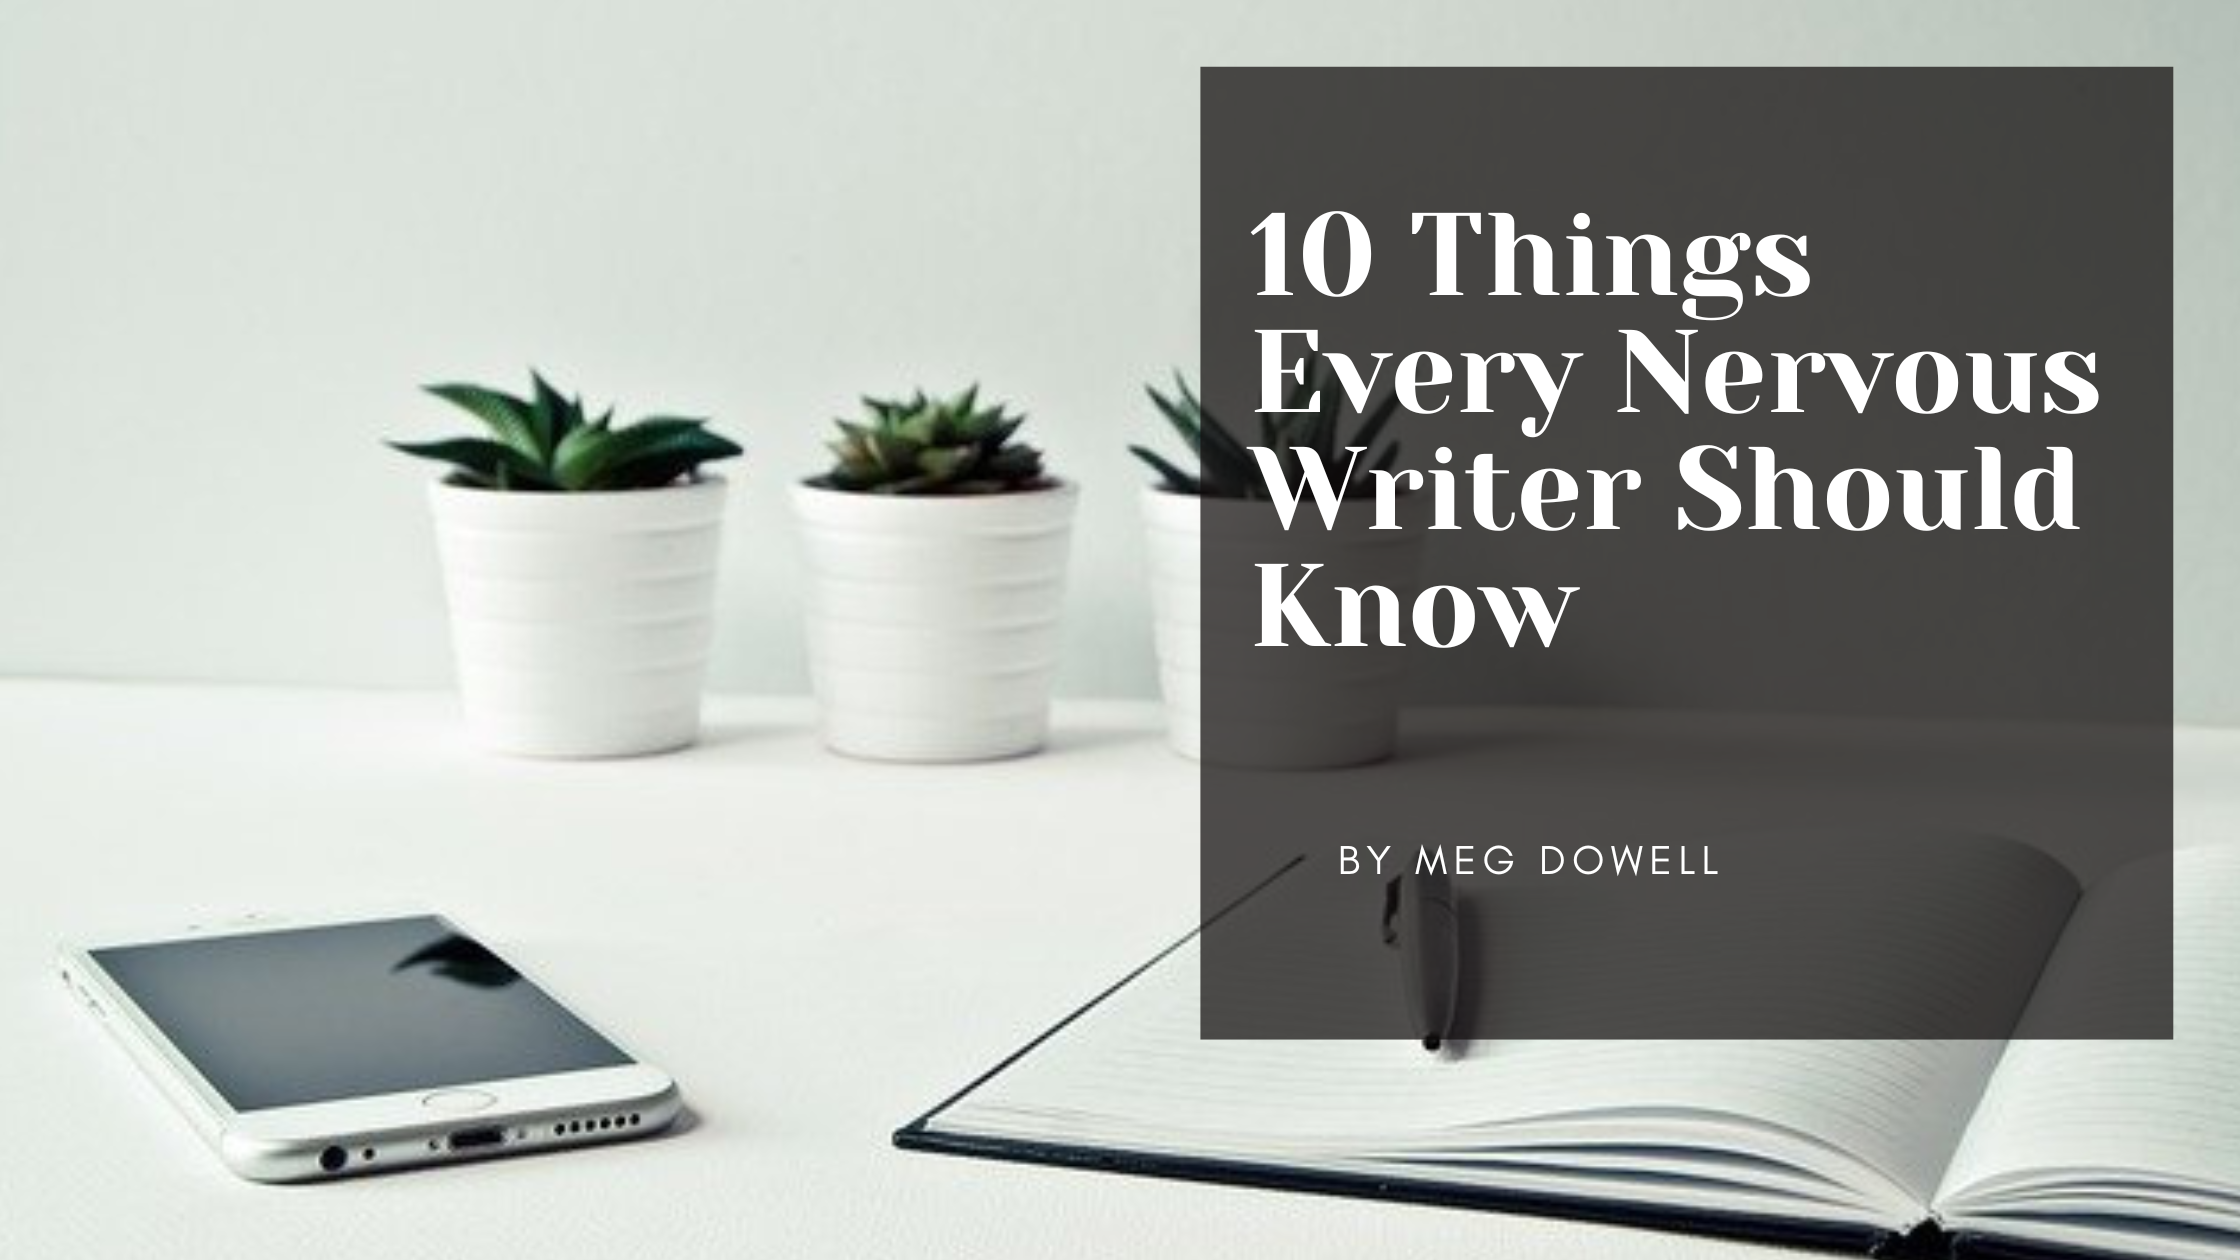 10 Things Every Nervous Writer Should Know